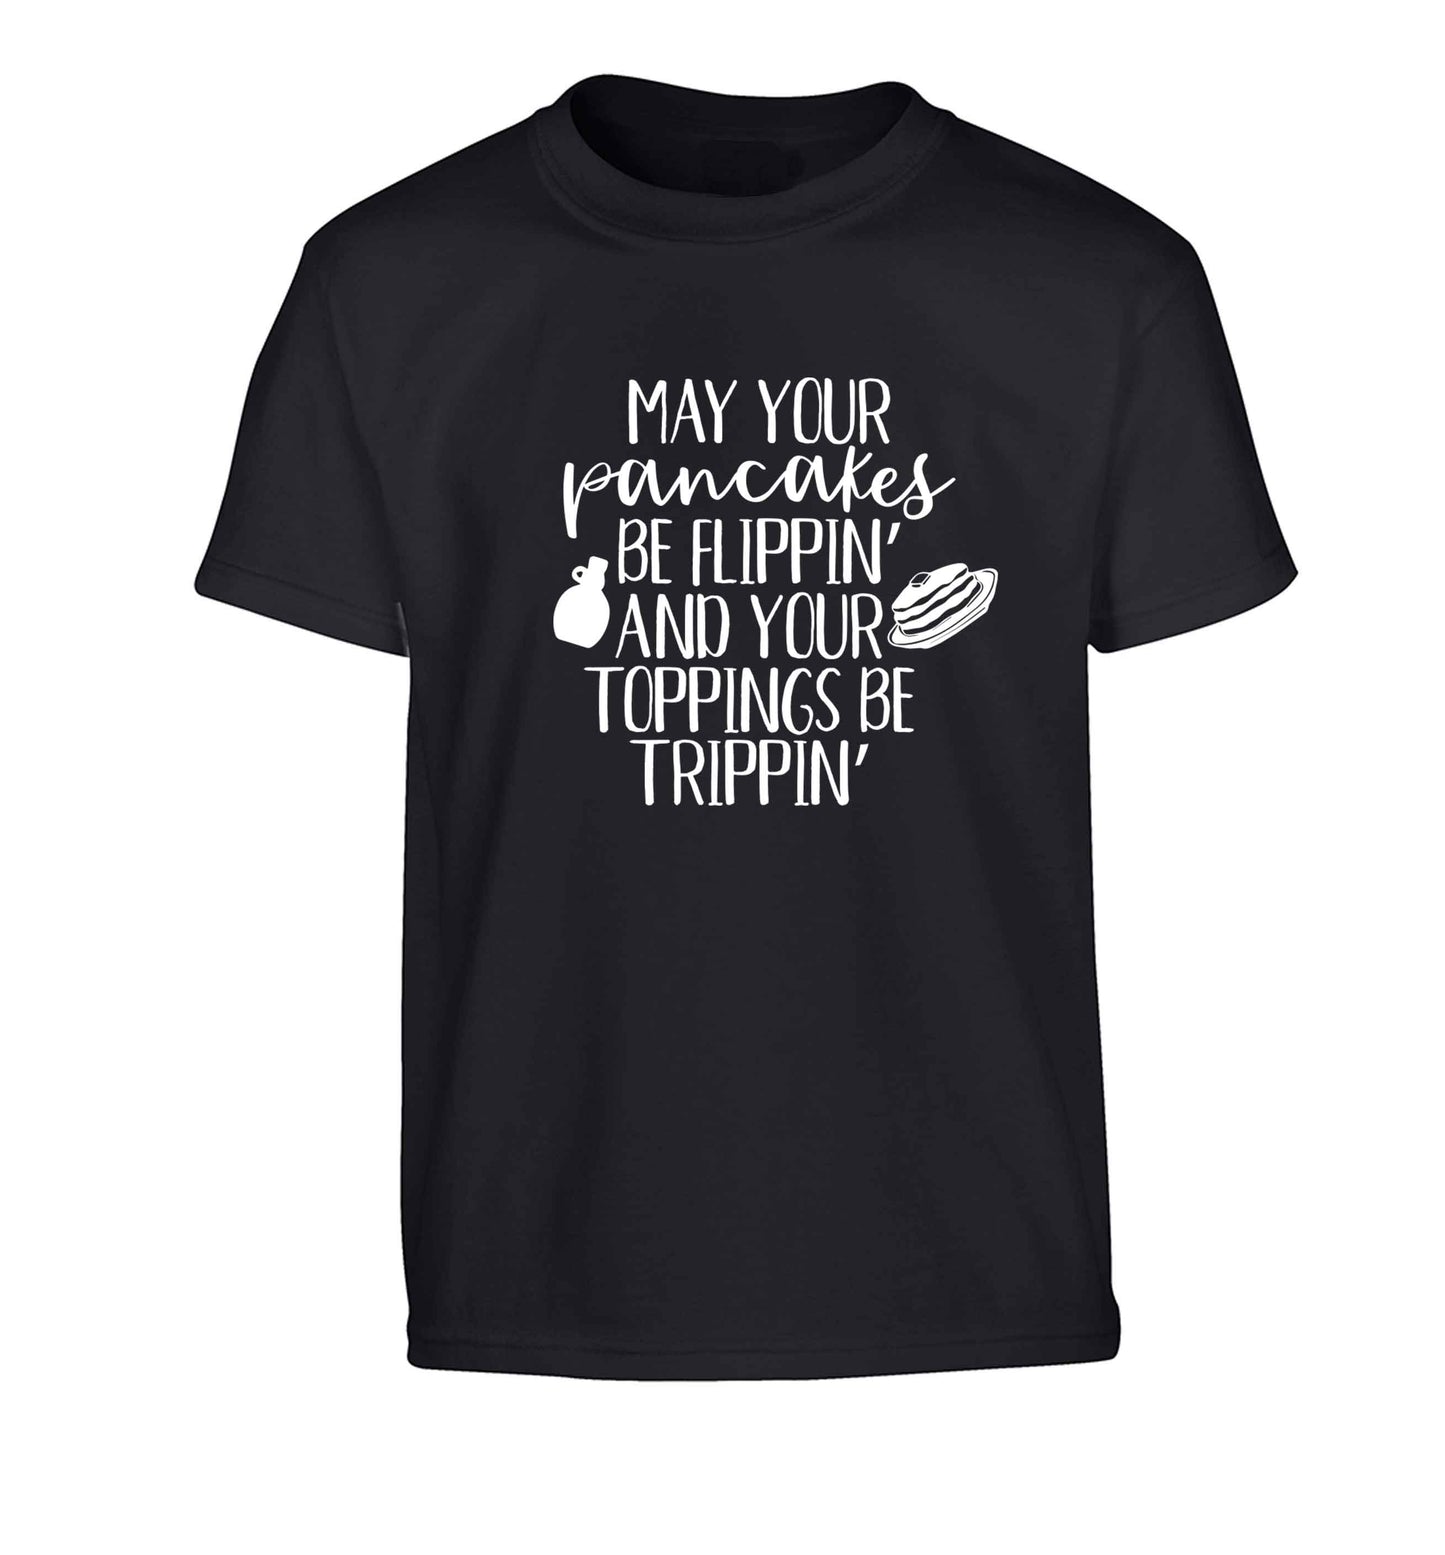 May your pancakes be flippin' and your toppings be trippin' Children's black Tshirt 12-13 Years